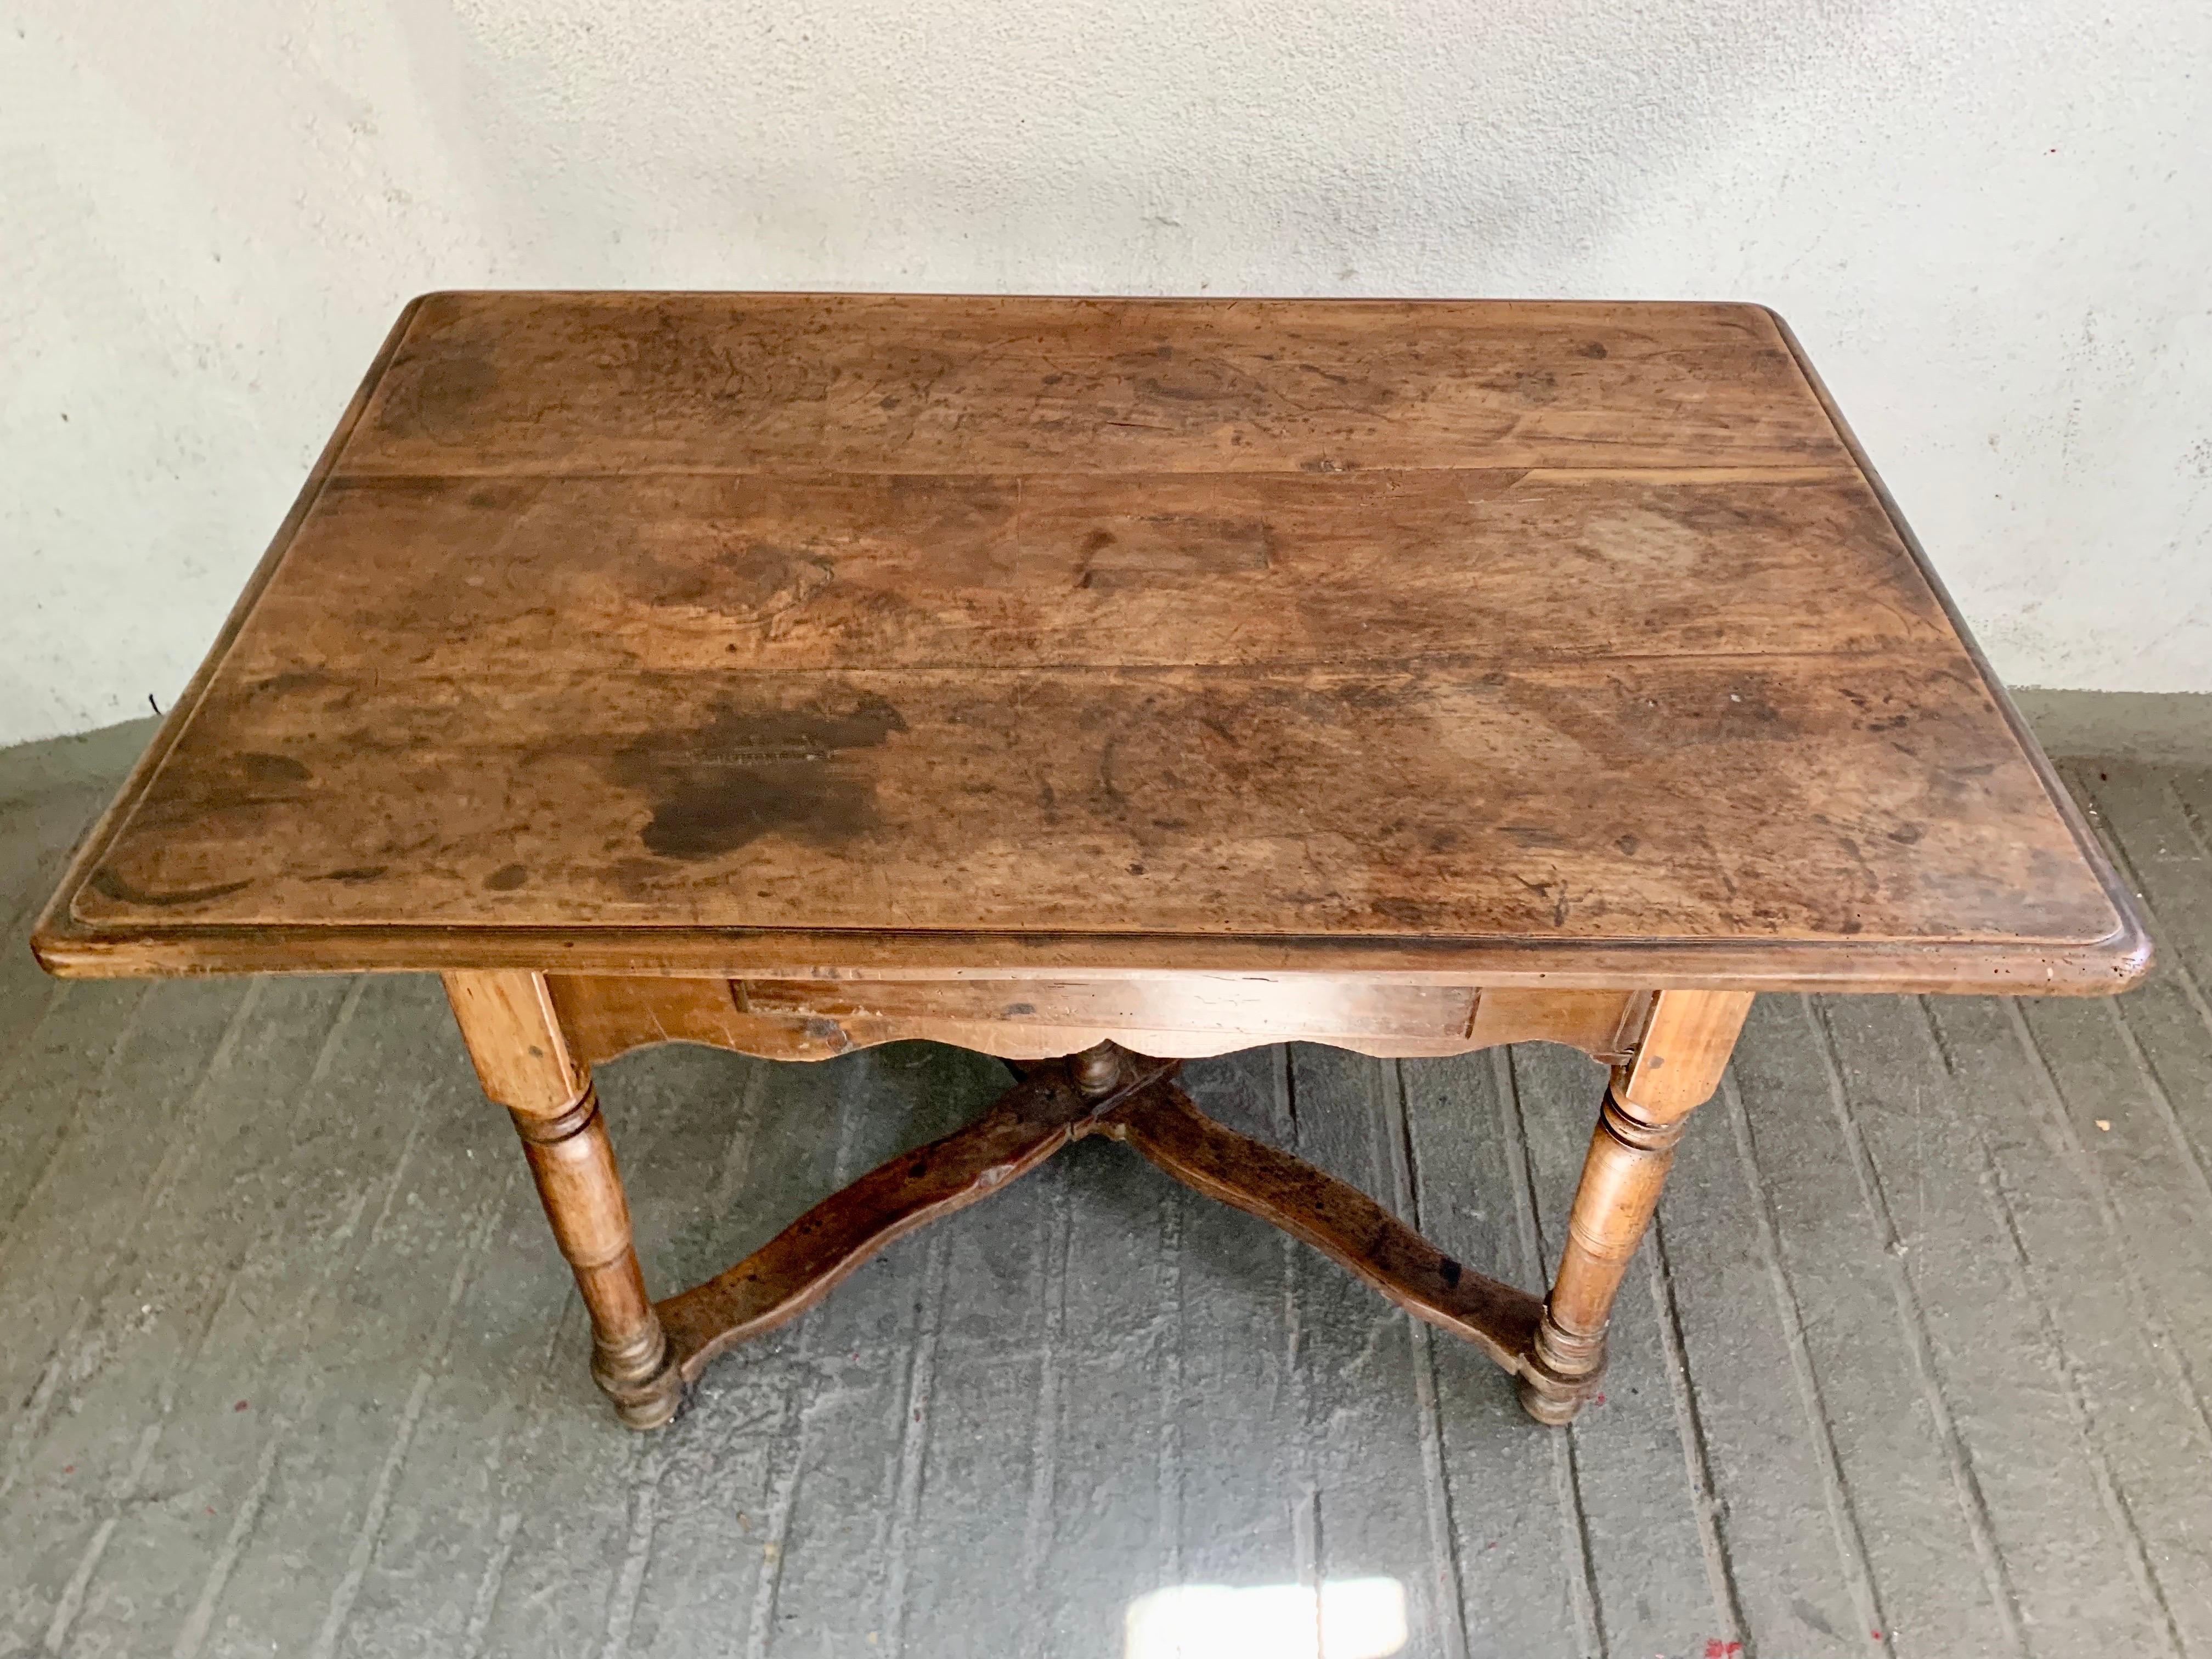 French walnut table in Louis XIII style, late 18th century, walnut with a single drawer from the 18th century. The legs are characteristically turned and the base is in the shape of an x-shaped cross, the lid can be removed and they have a single